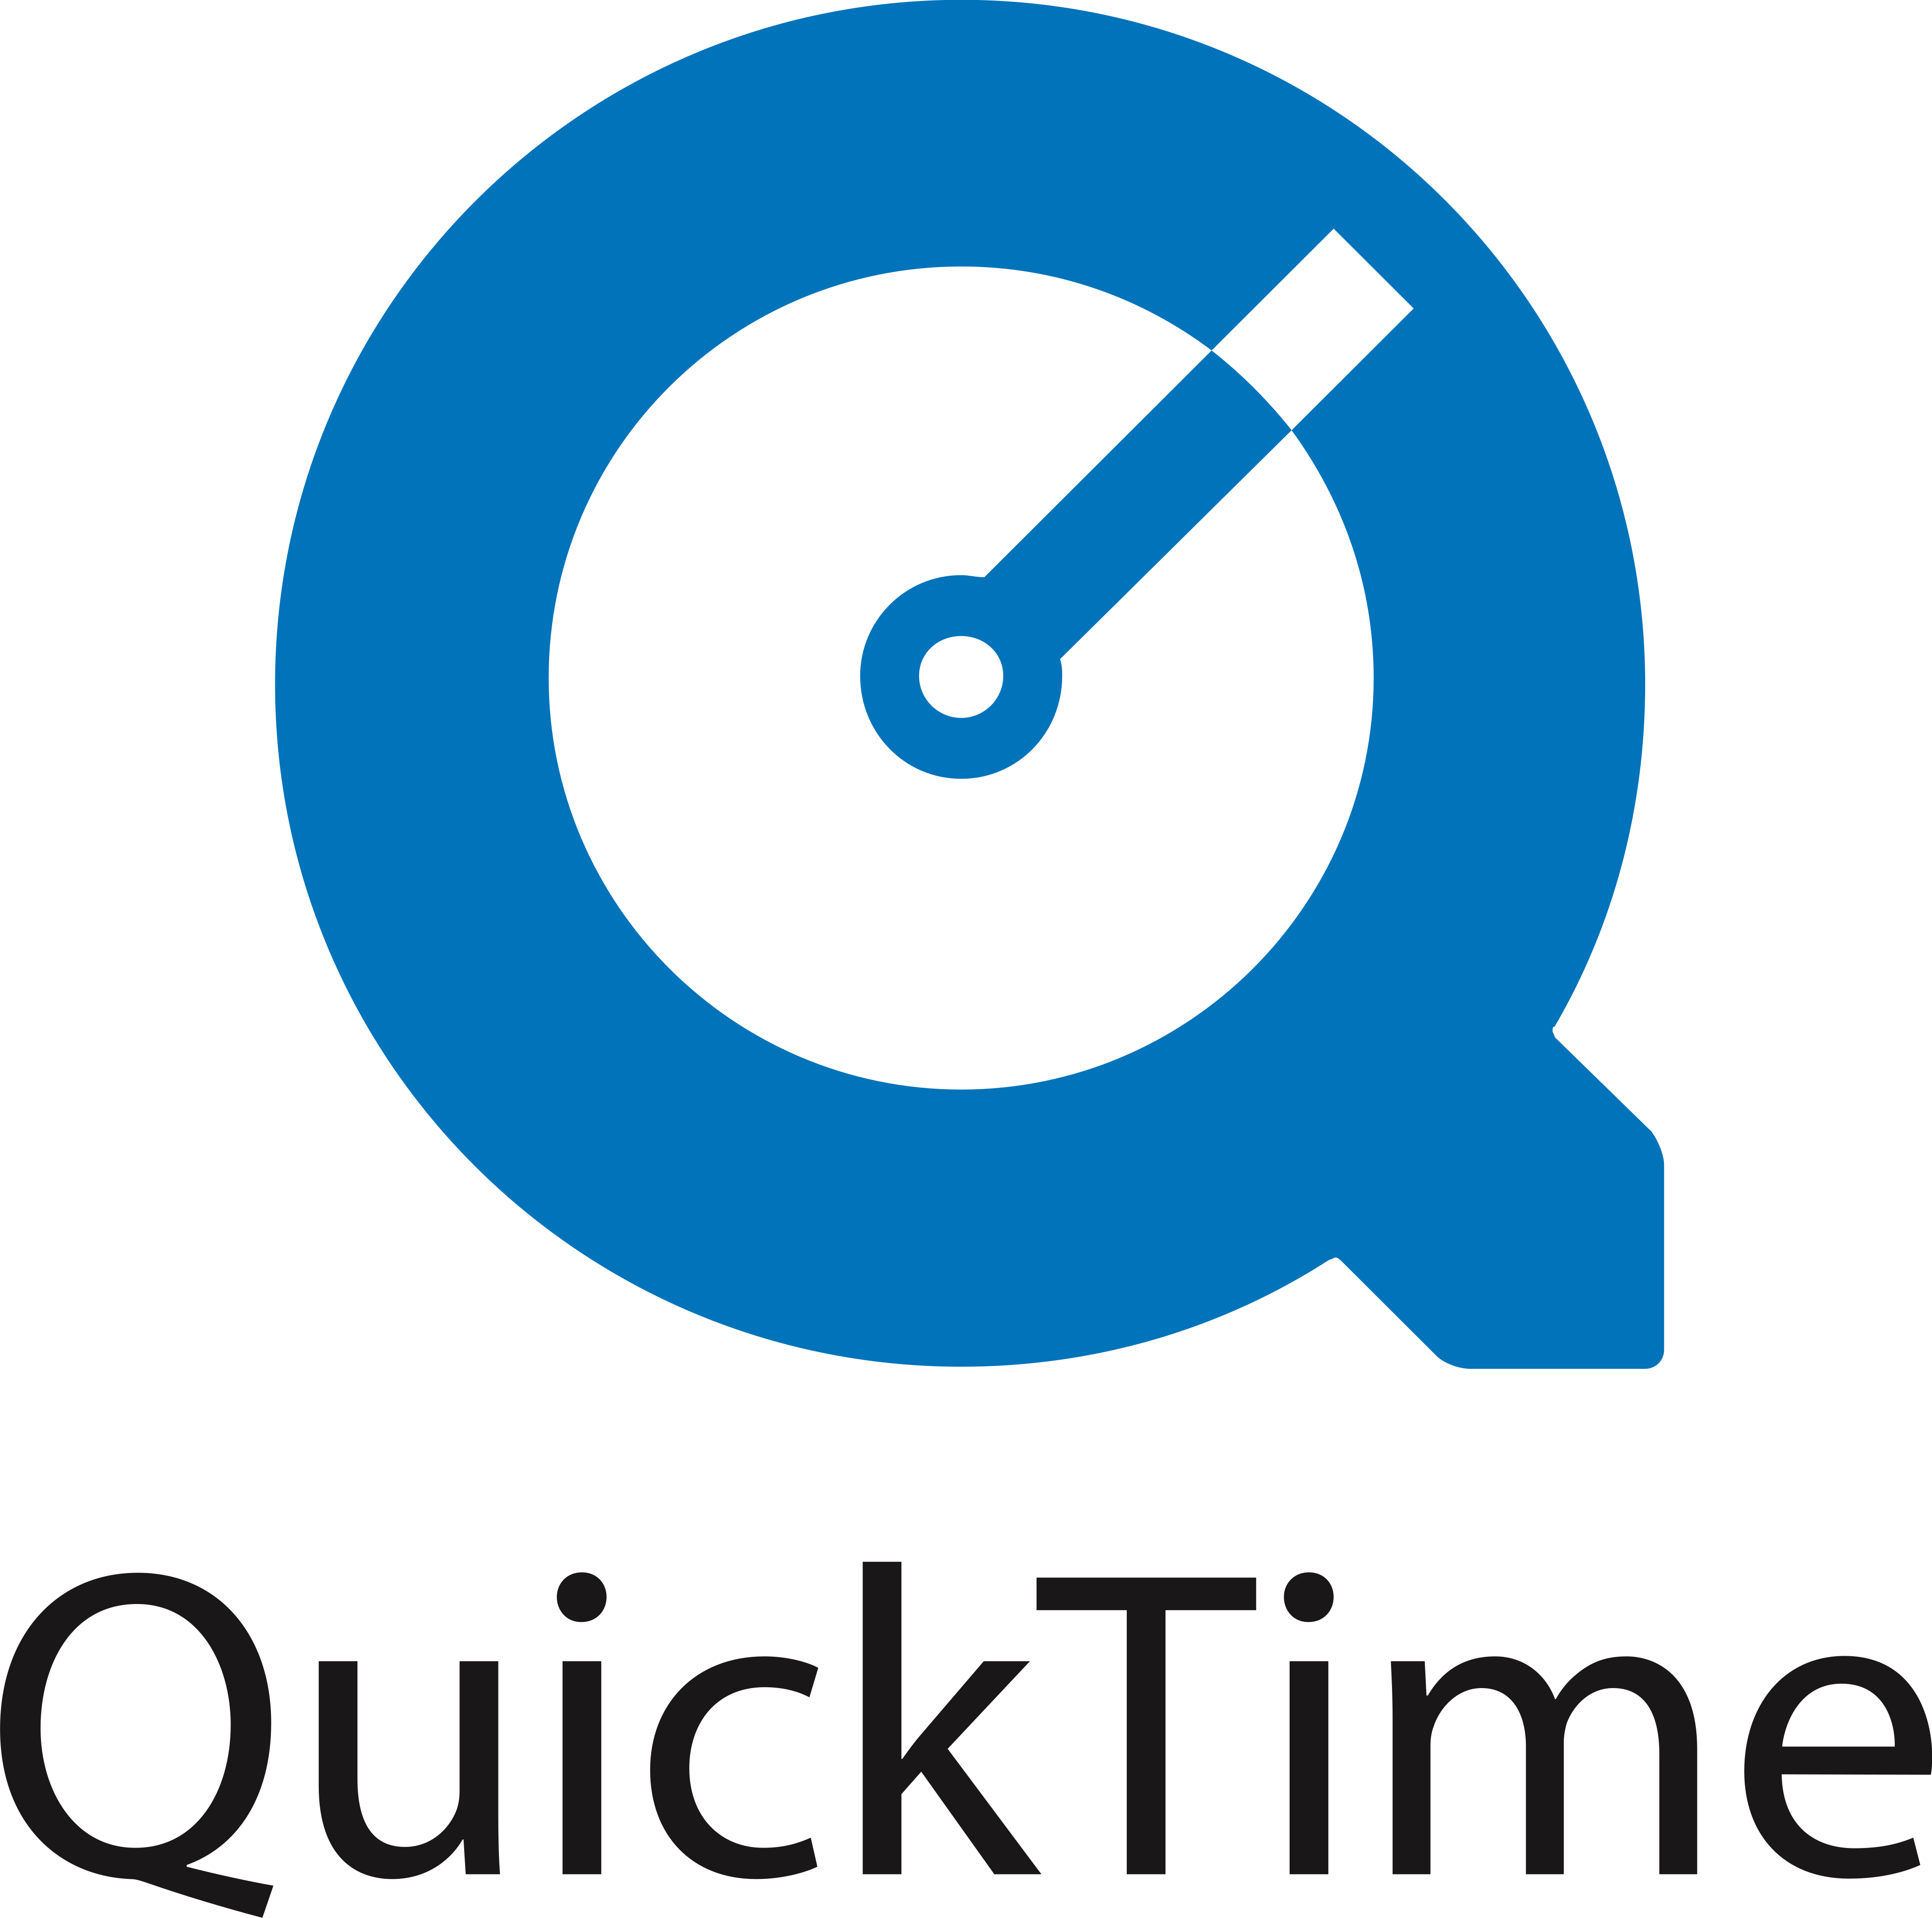 Quick player. QUICKTIME. QUICKTIME Формат. QUICKTIME логотип. QUICKTIME иконка.